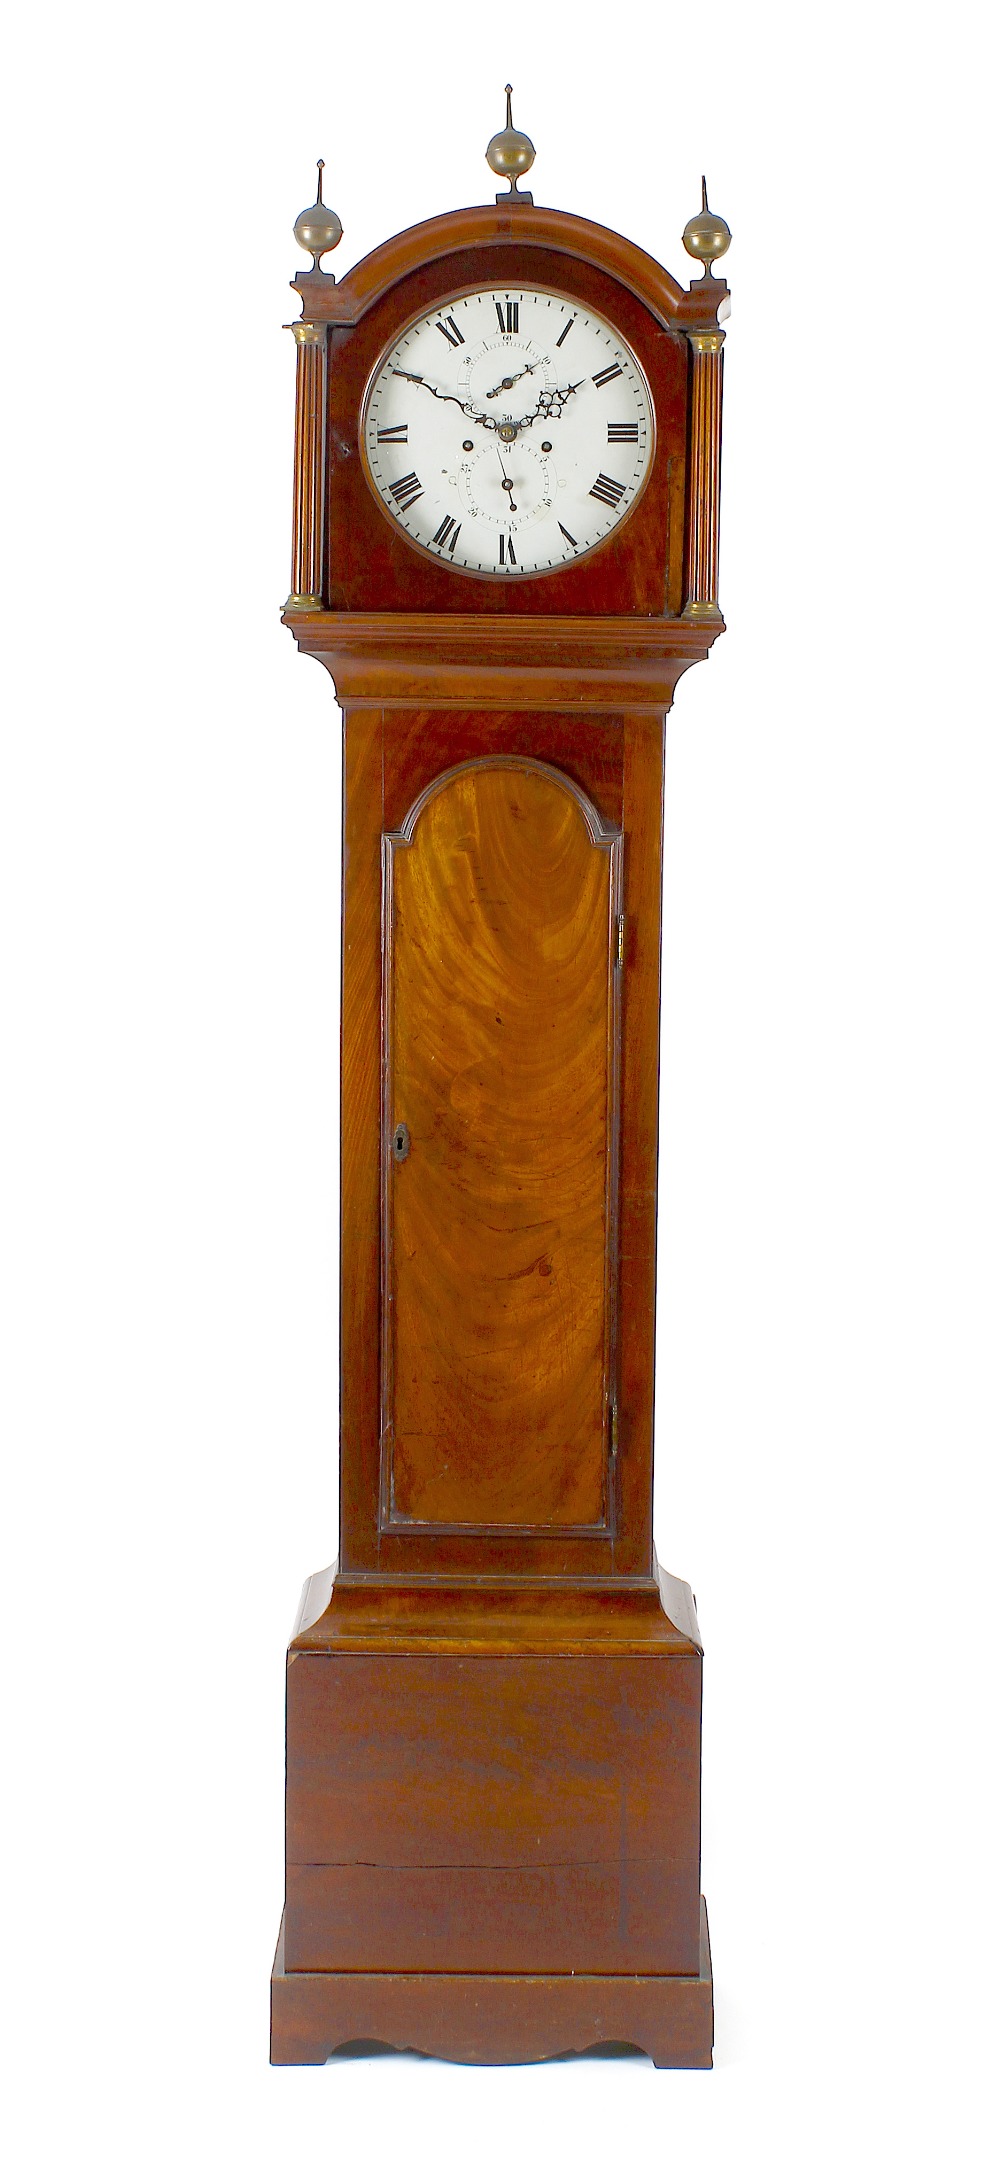 An early 19th century mahogany-cased 8-day painted dial longcase clock. Anonymous, circa 1830 The